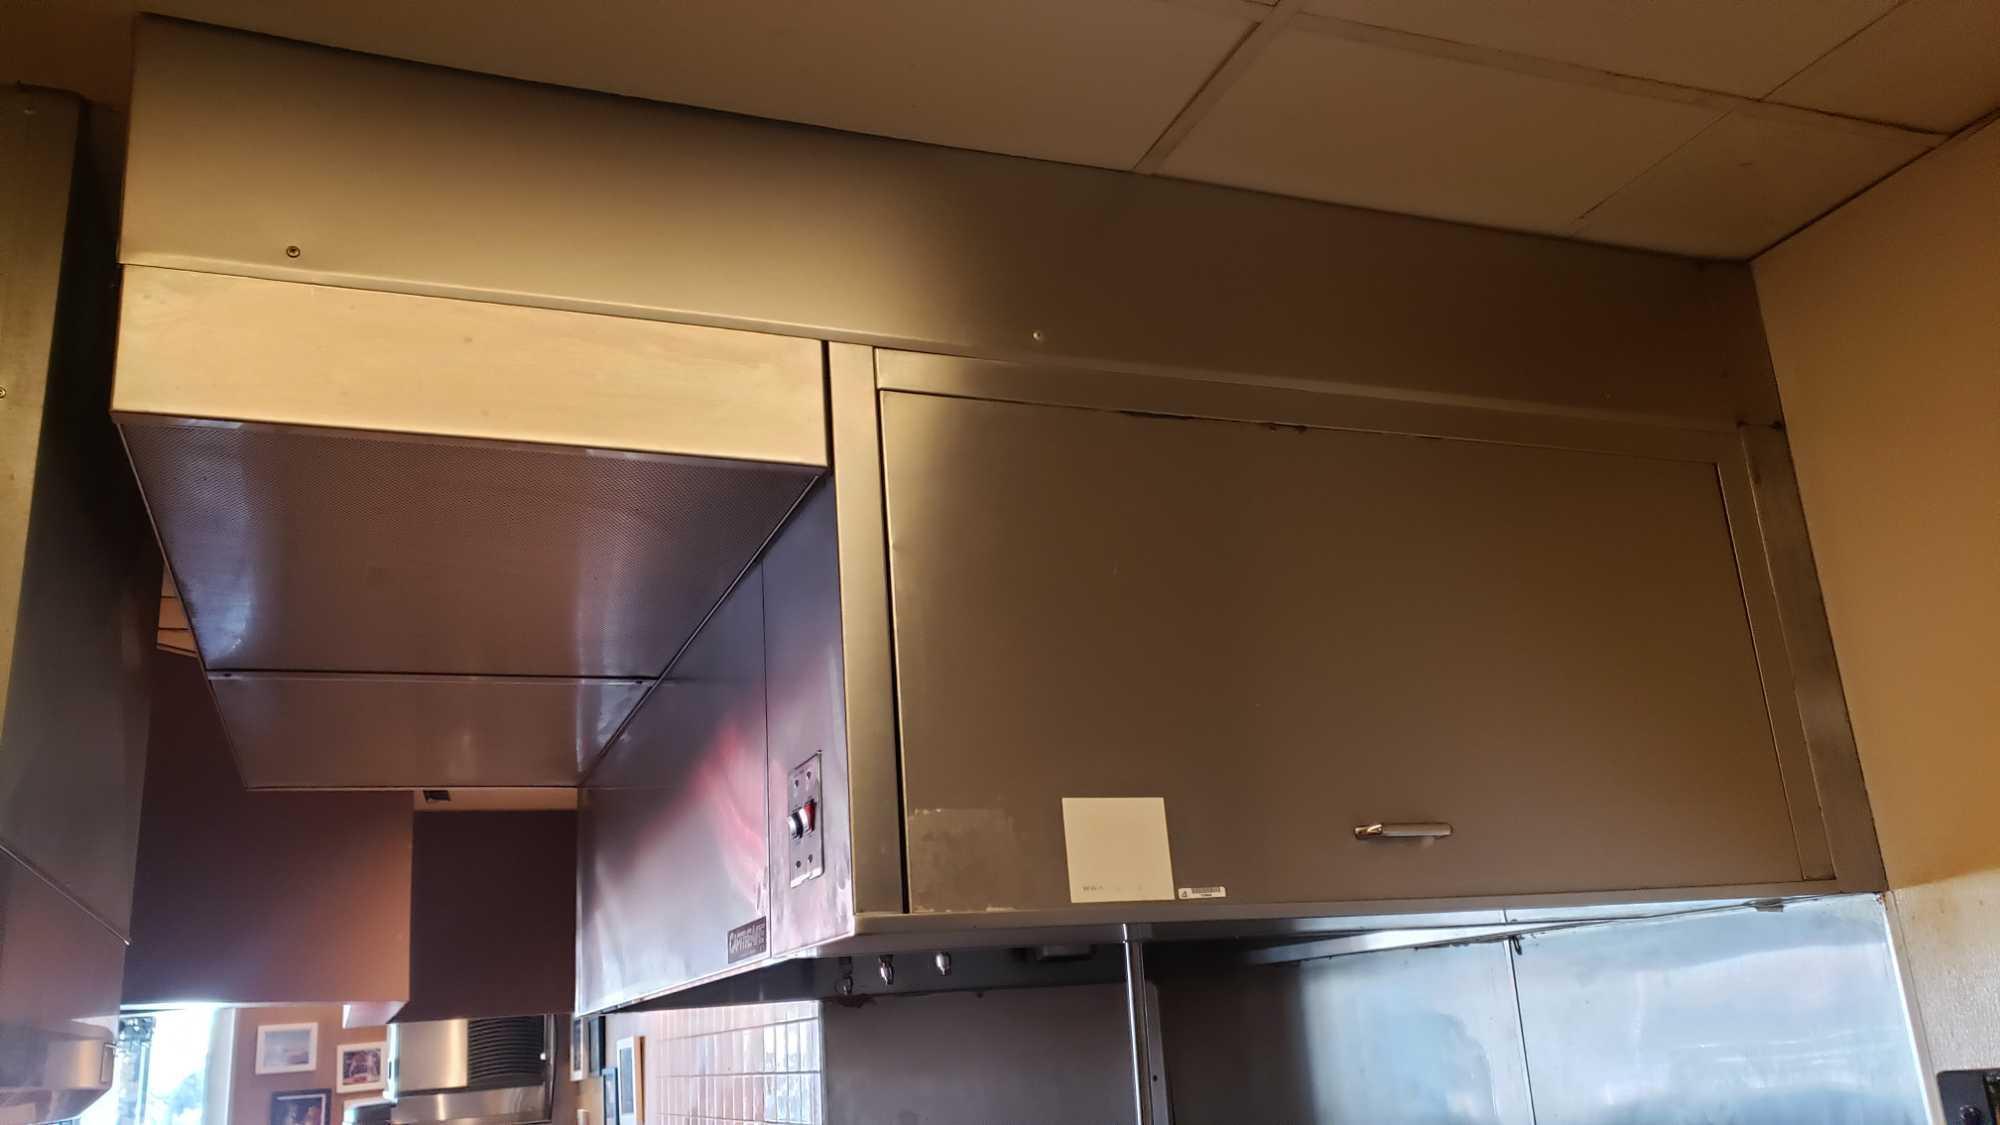 CAPTIVE AIRE EXHAUST HOOD